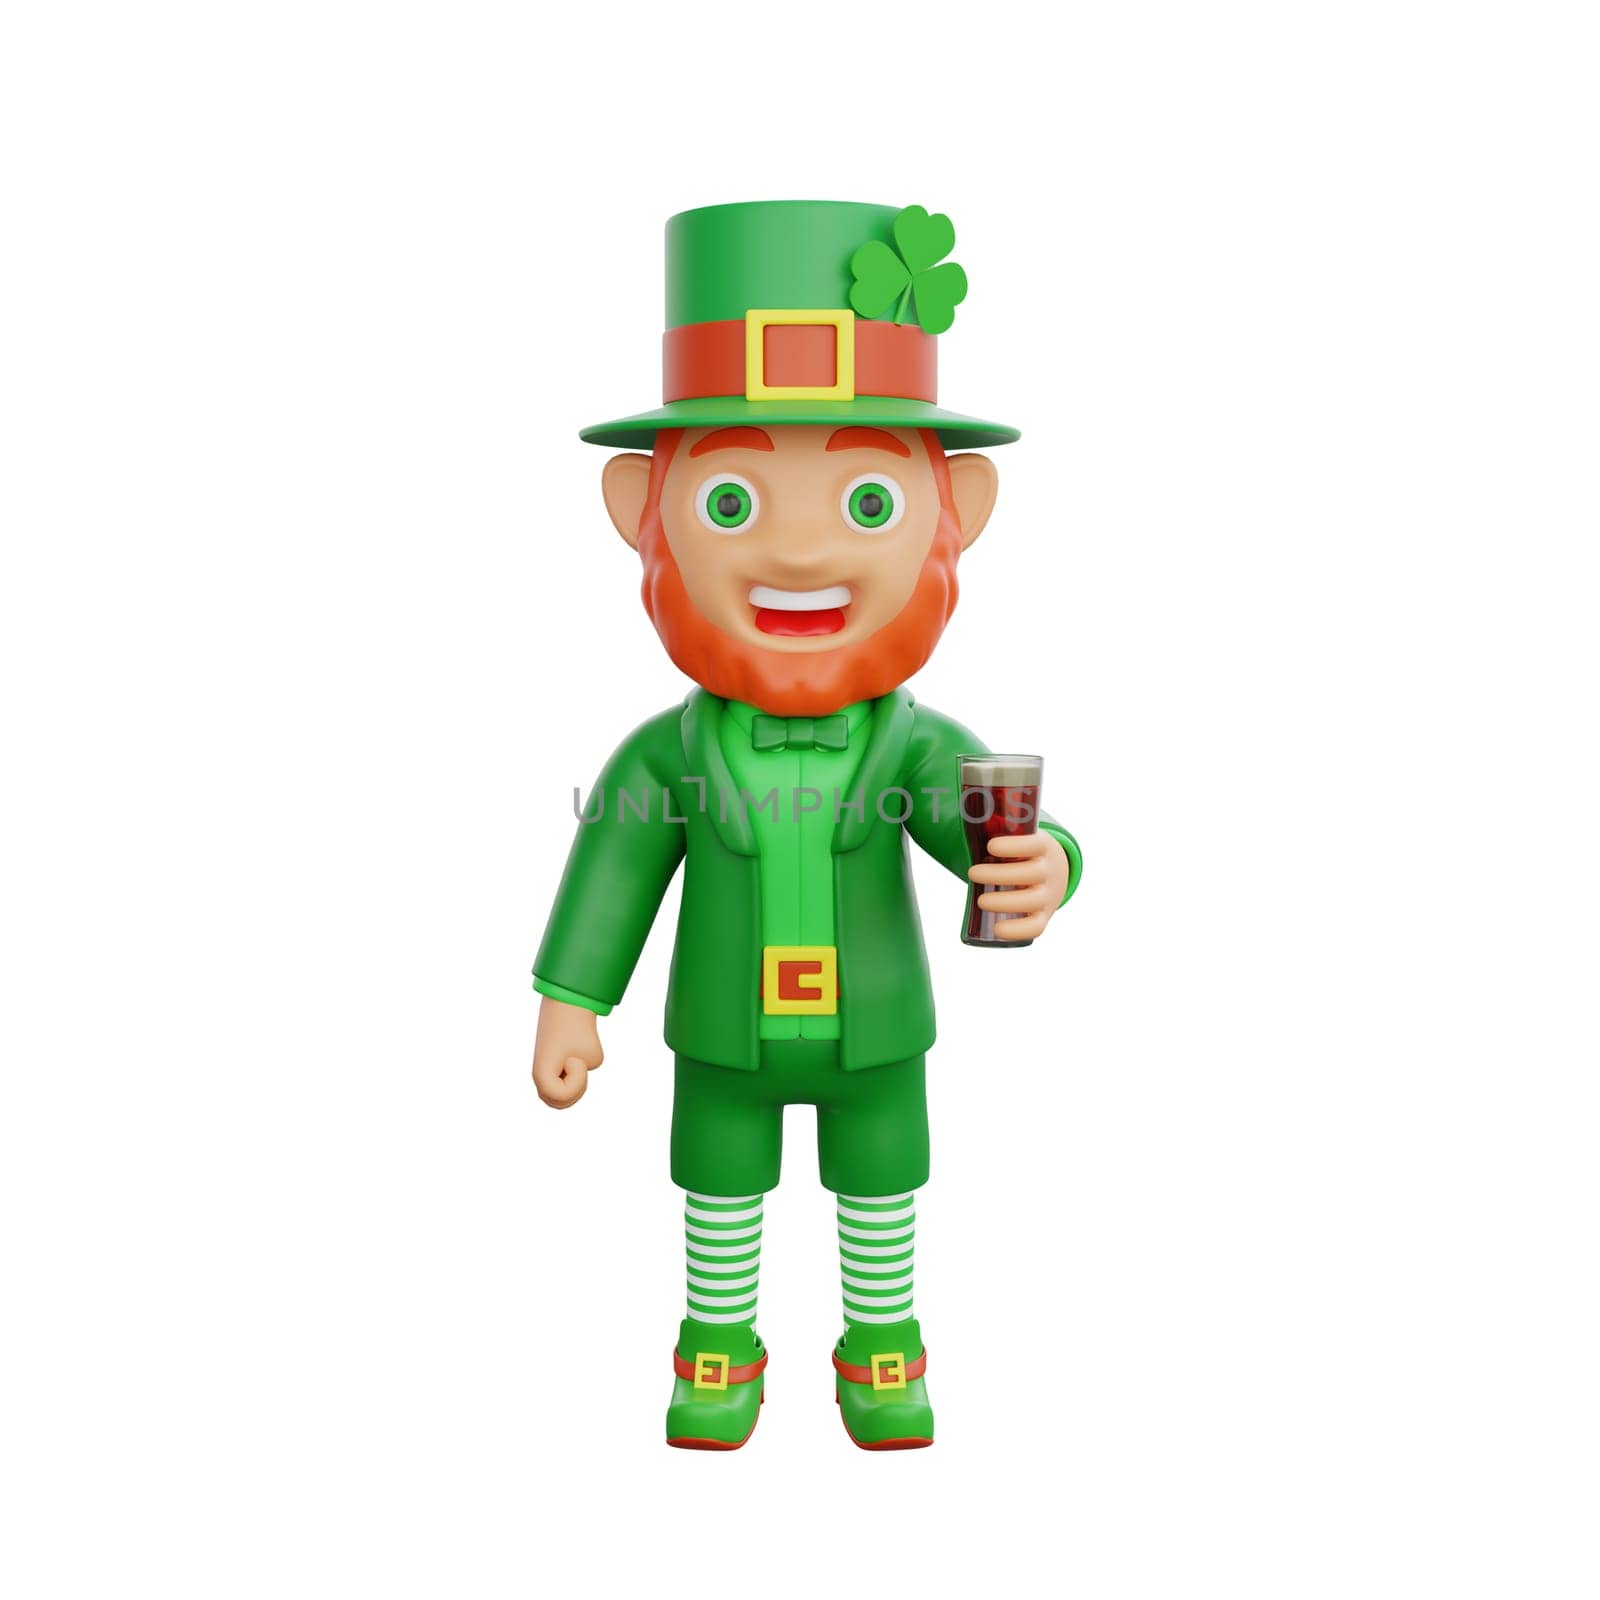 3D illustration of St. Patrick's Day character leprechaun holding glass of frothy beer